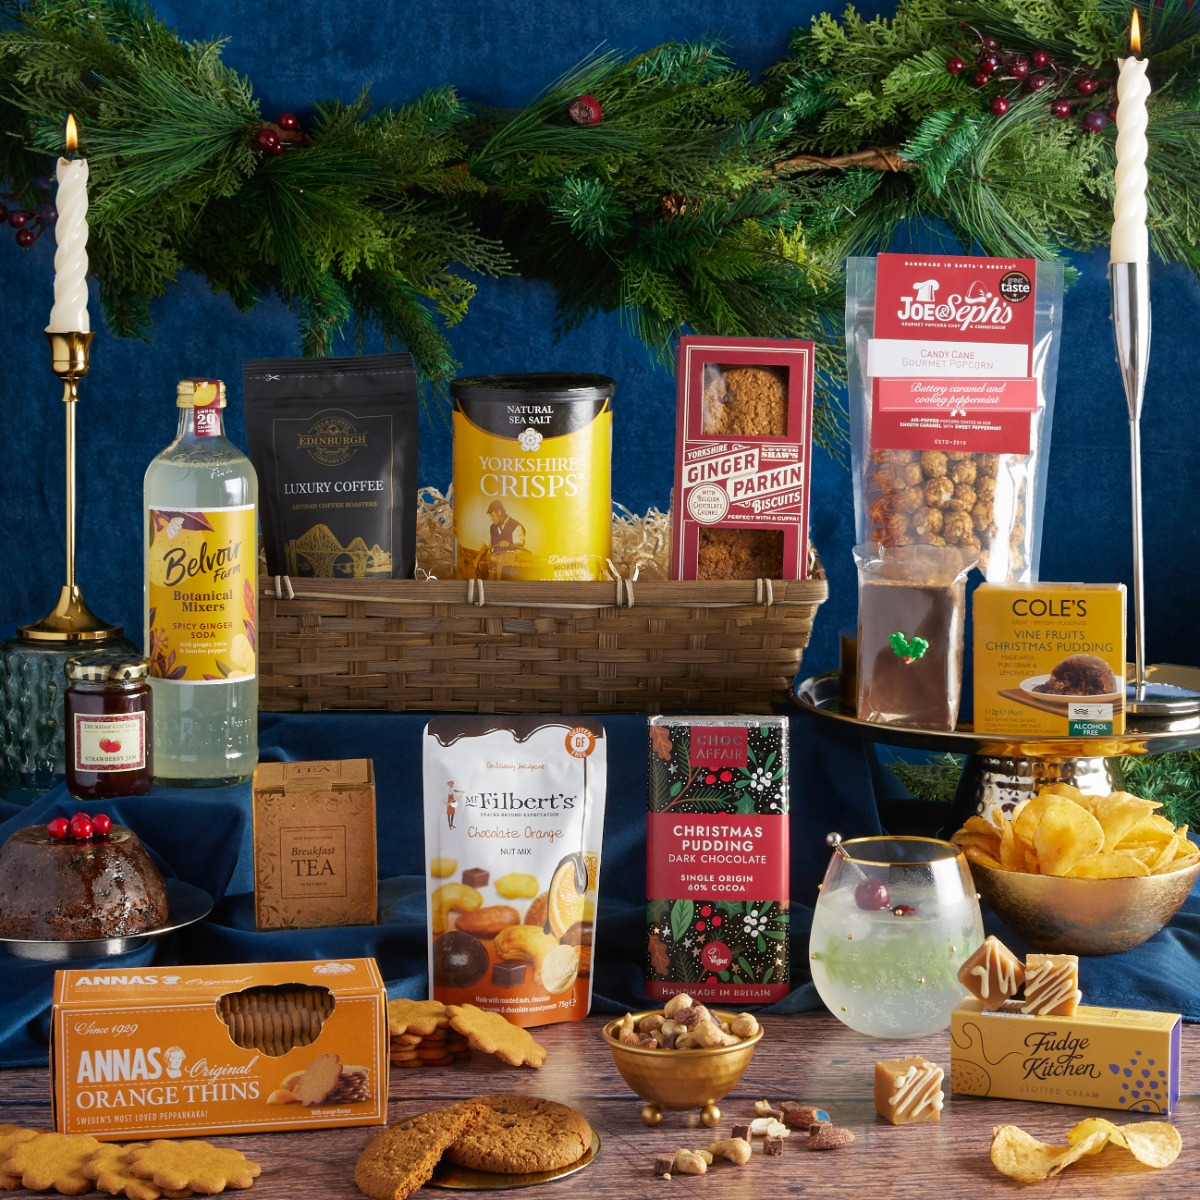  Luxury Joy of Christmas Hamper with contents on display